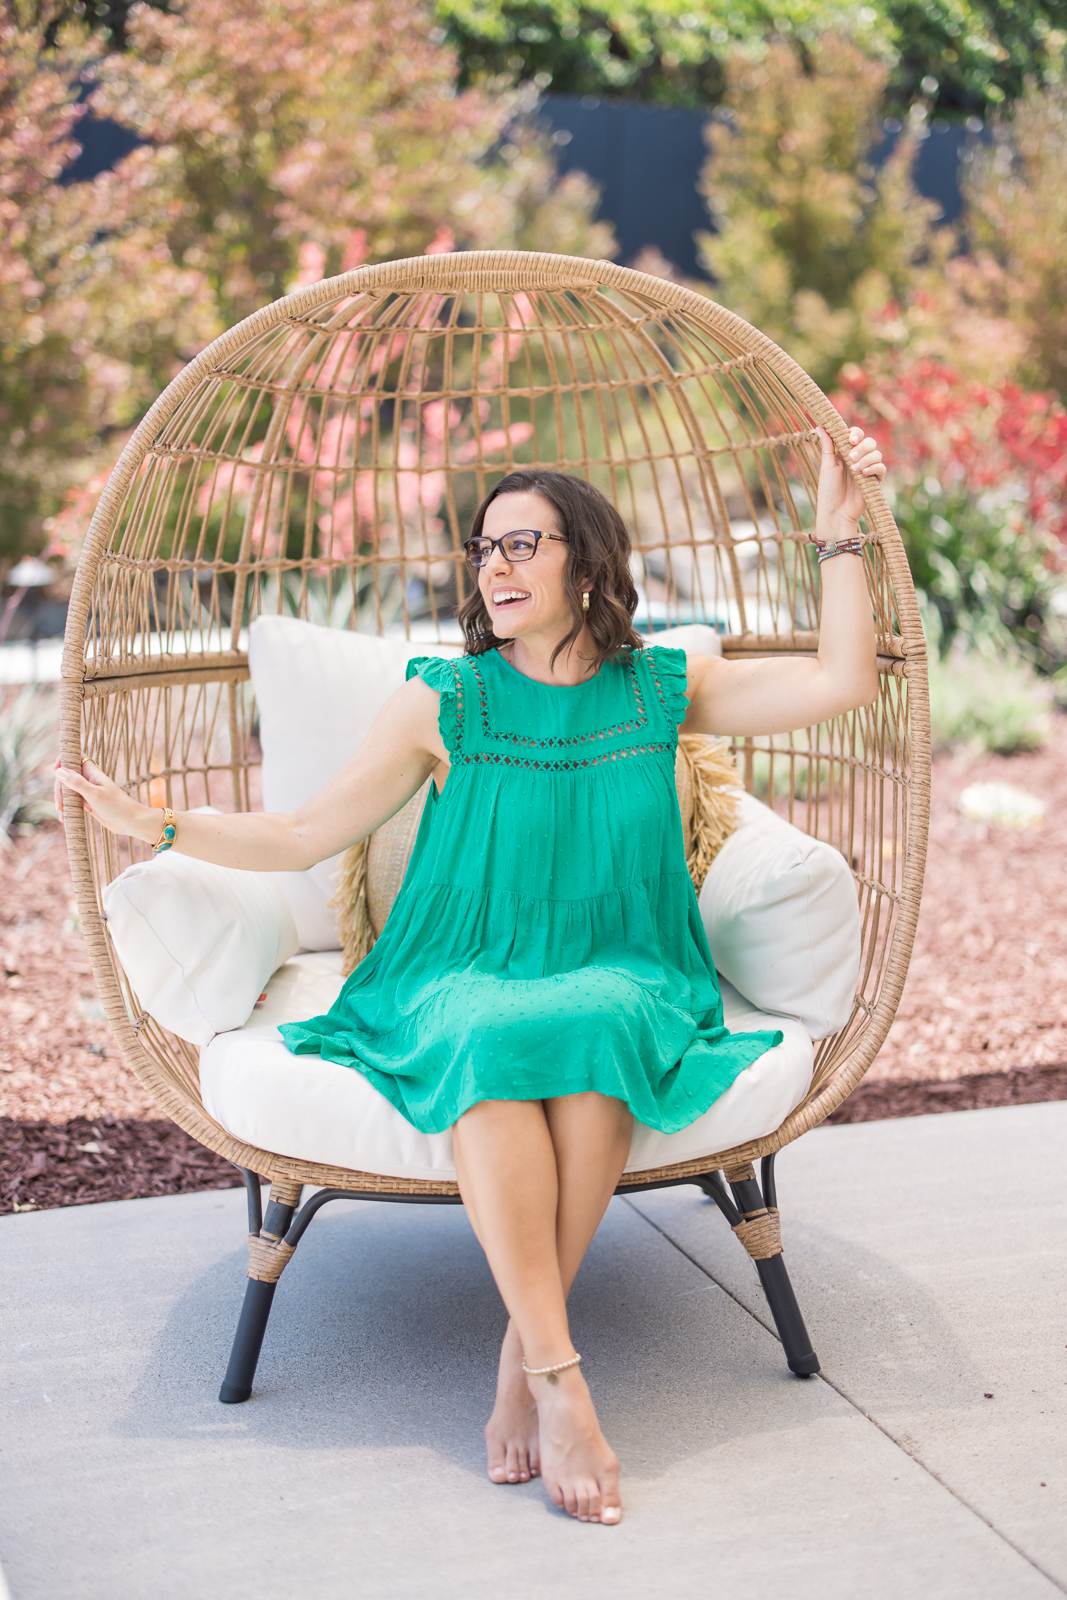 Woman wearing green, sitting in a big chair outside while looking away from Meg Marie during her personal brand photo shoot.